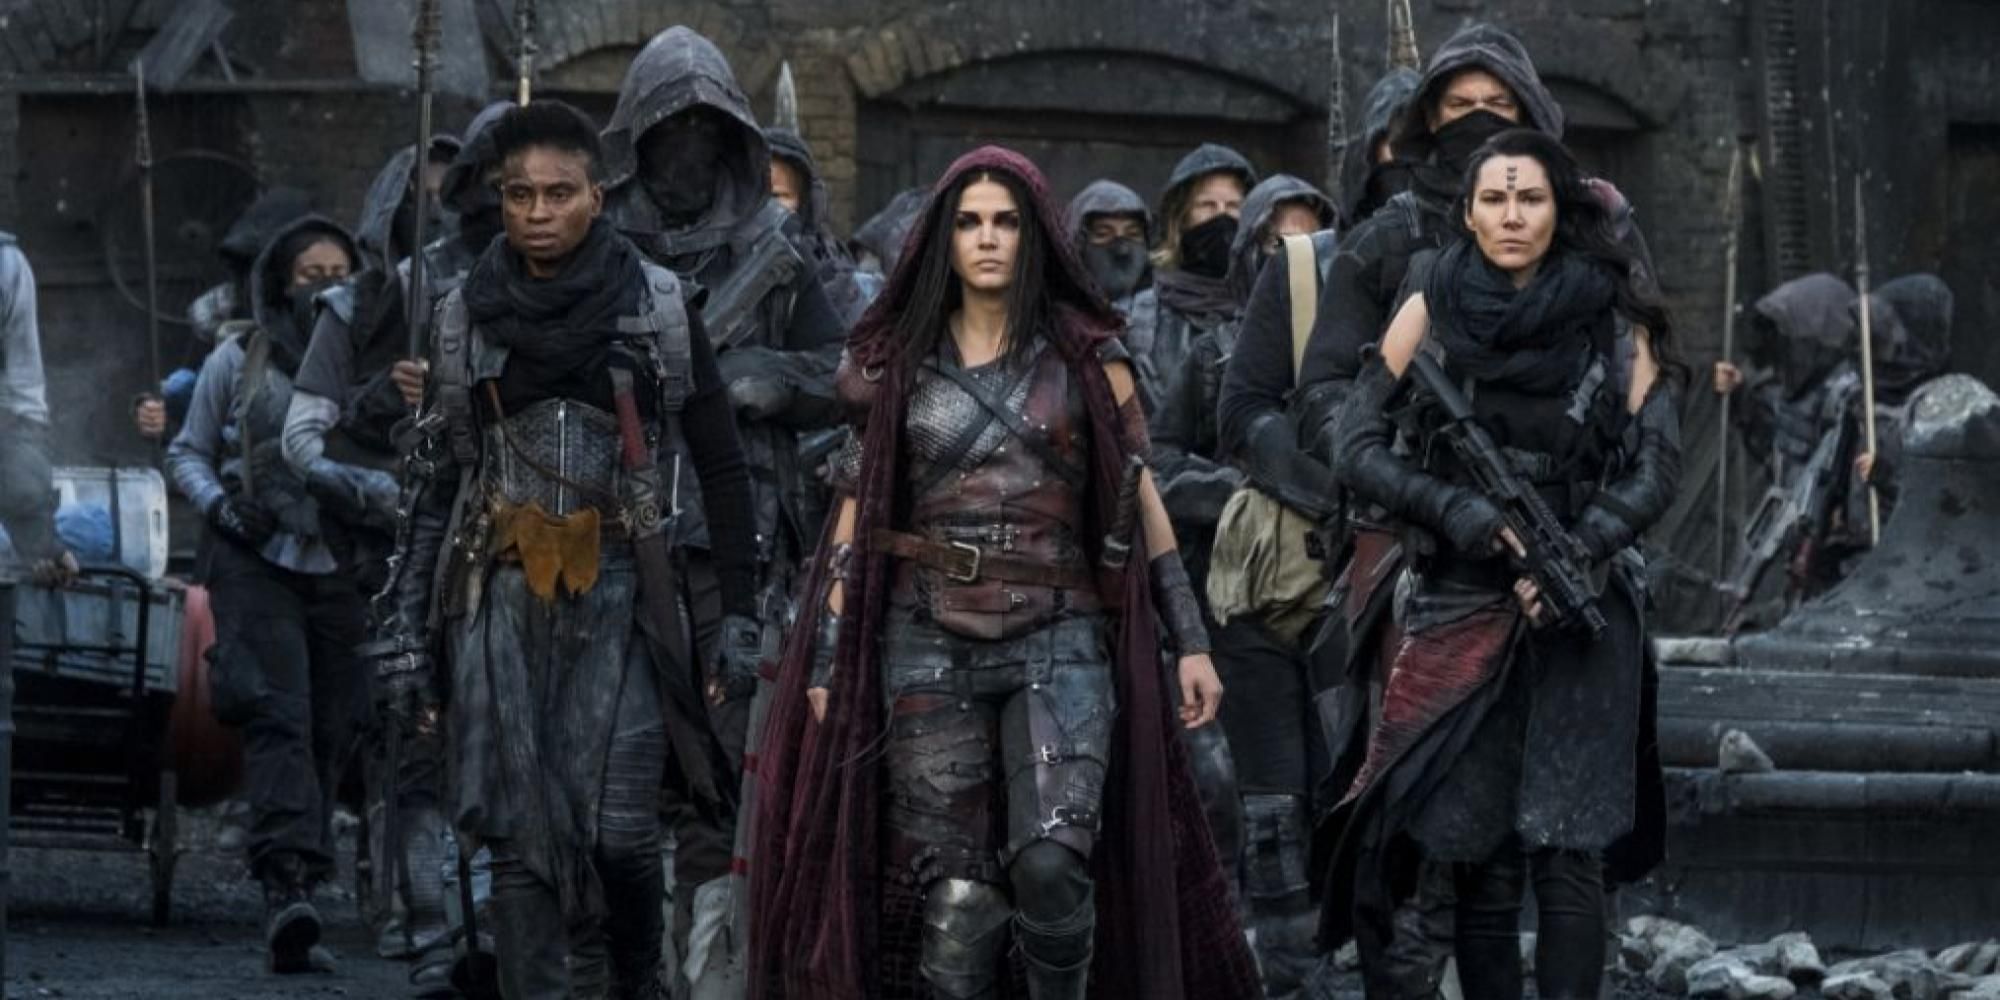 Octavia leads her soldiers as Blodreina in the 100